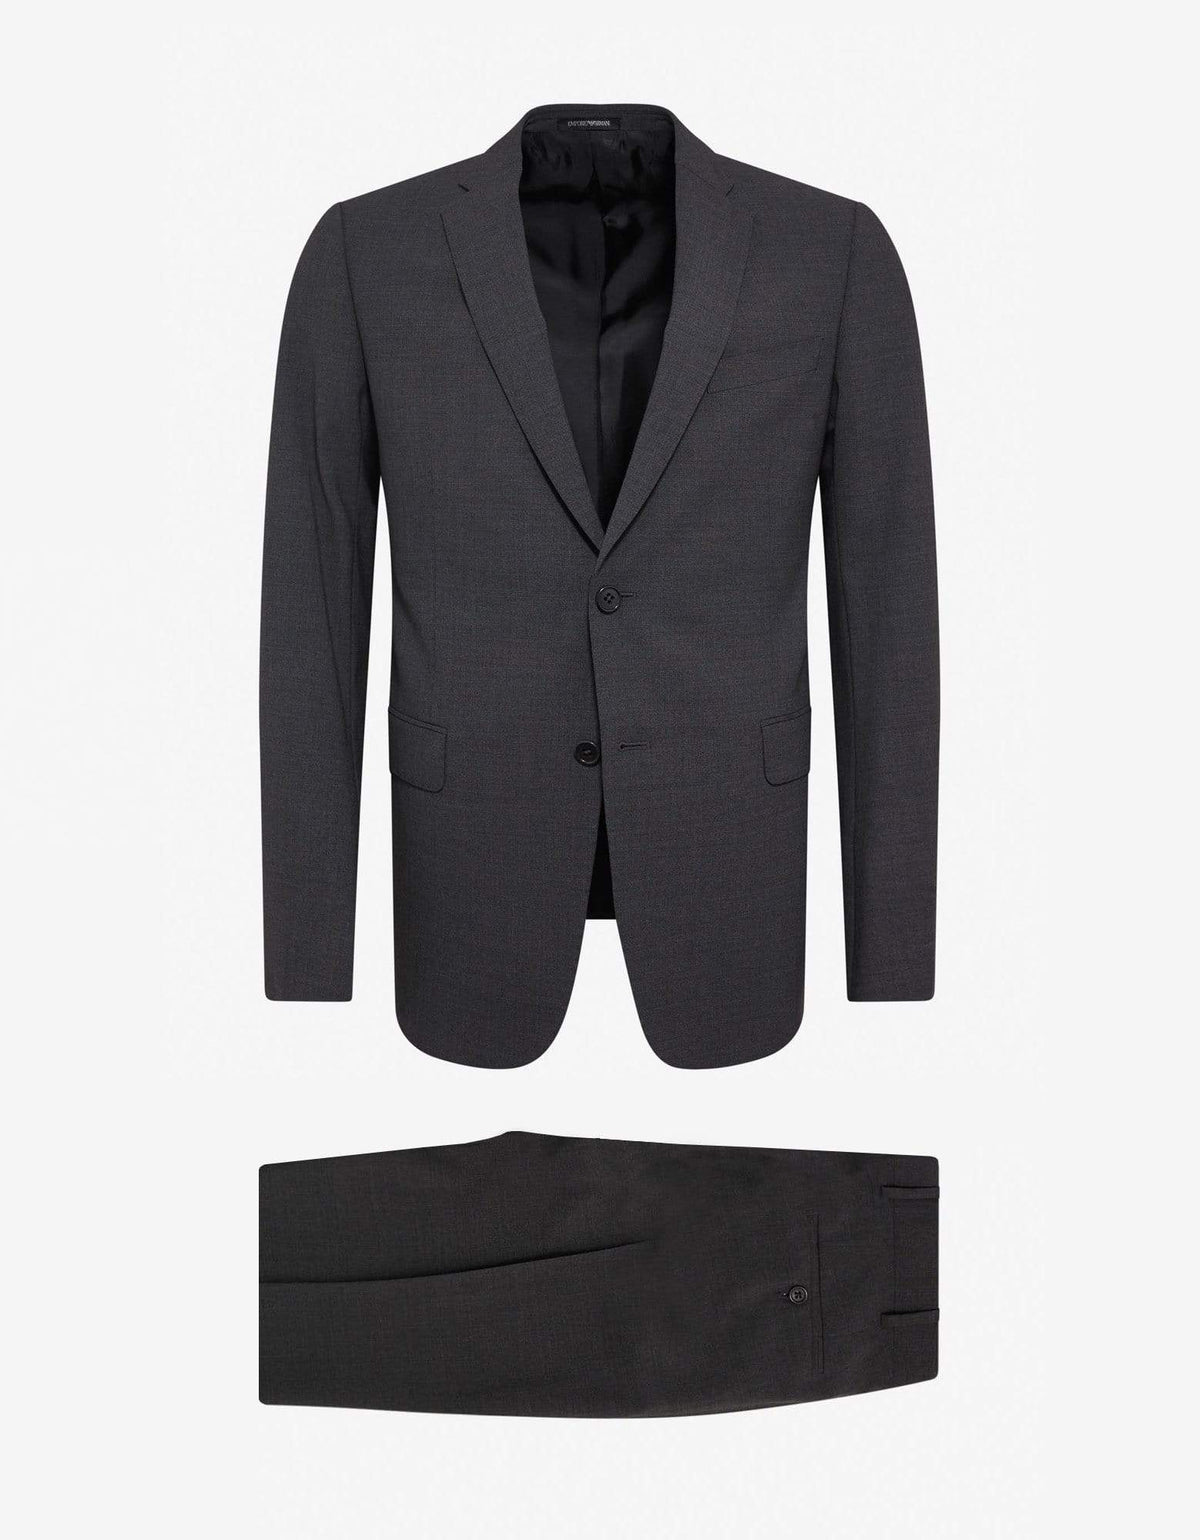 Emporio Armani Grey Wool-Blend Two-Button Suit